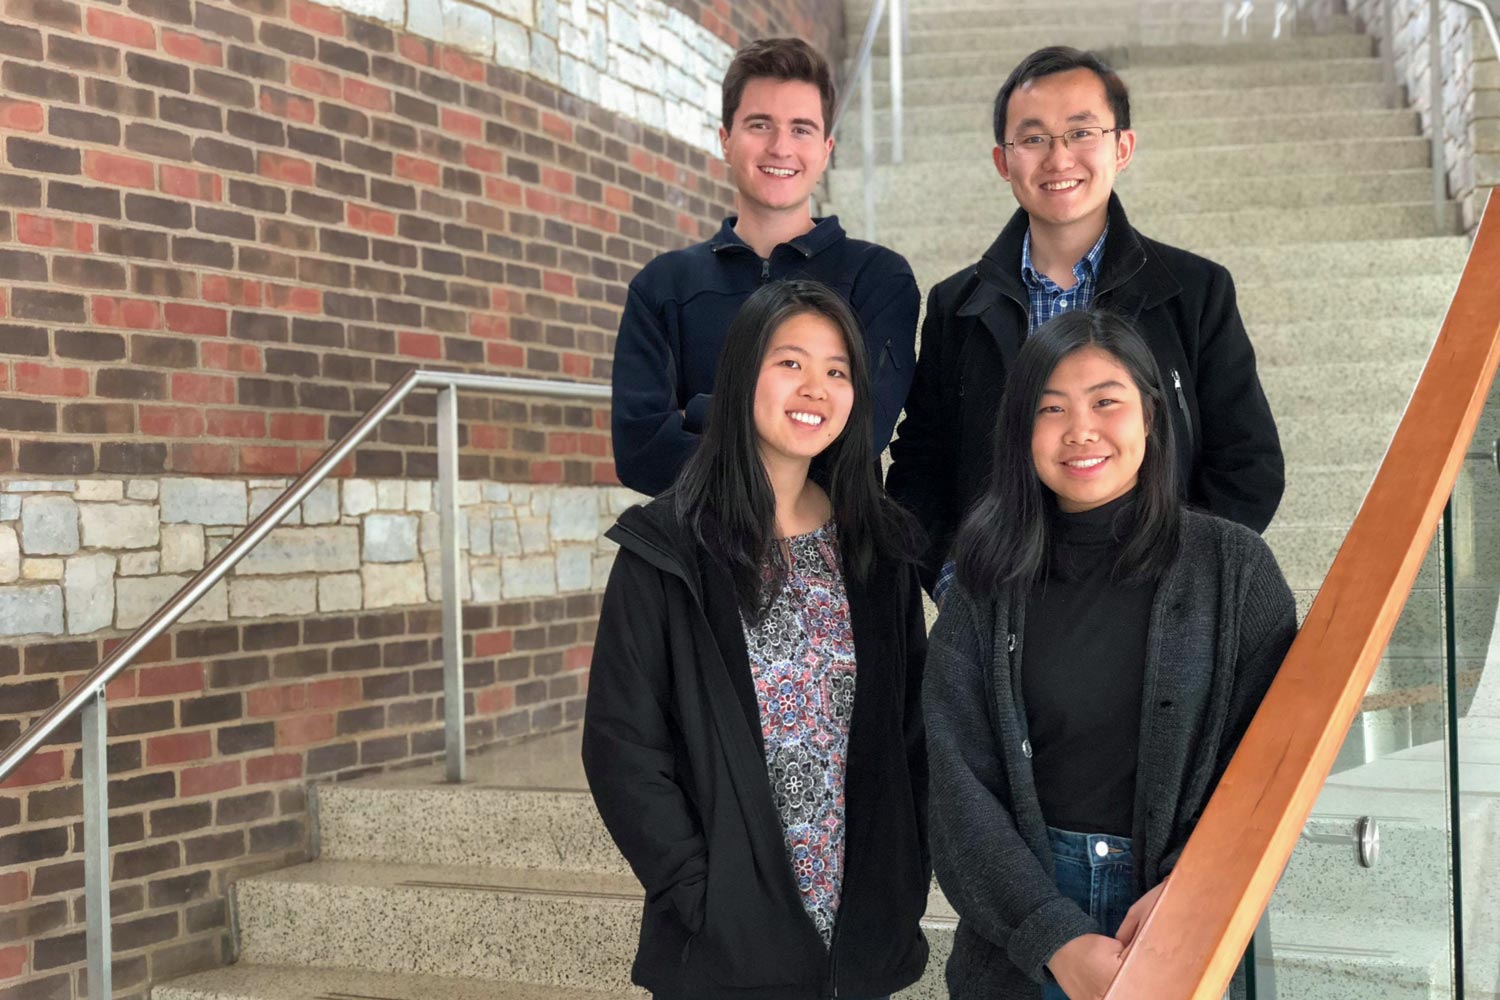  Clockwise from top left, students Jackson Samples, Eric Xu, Eileen Ying and Irena Huang stand on steps smiling for the camera